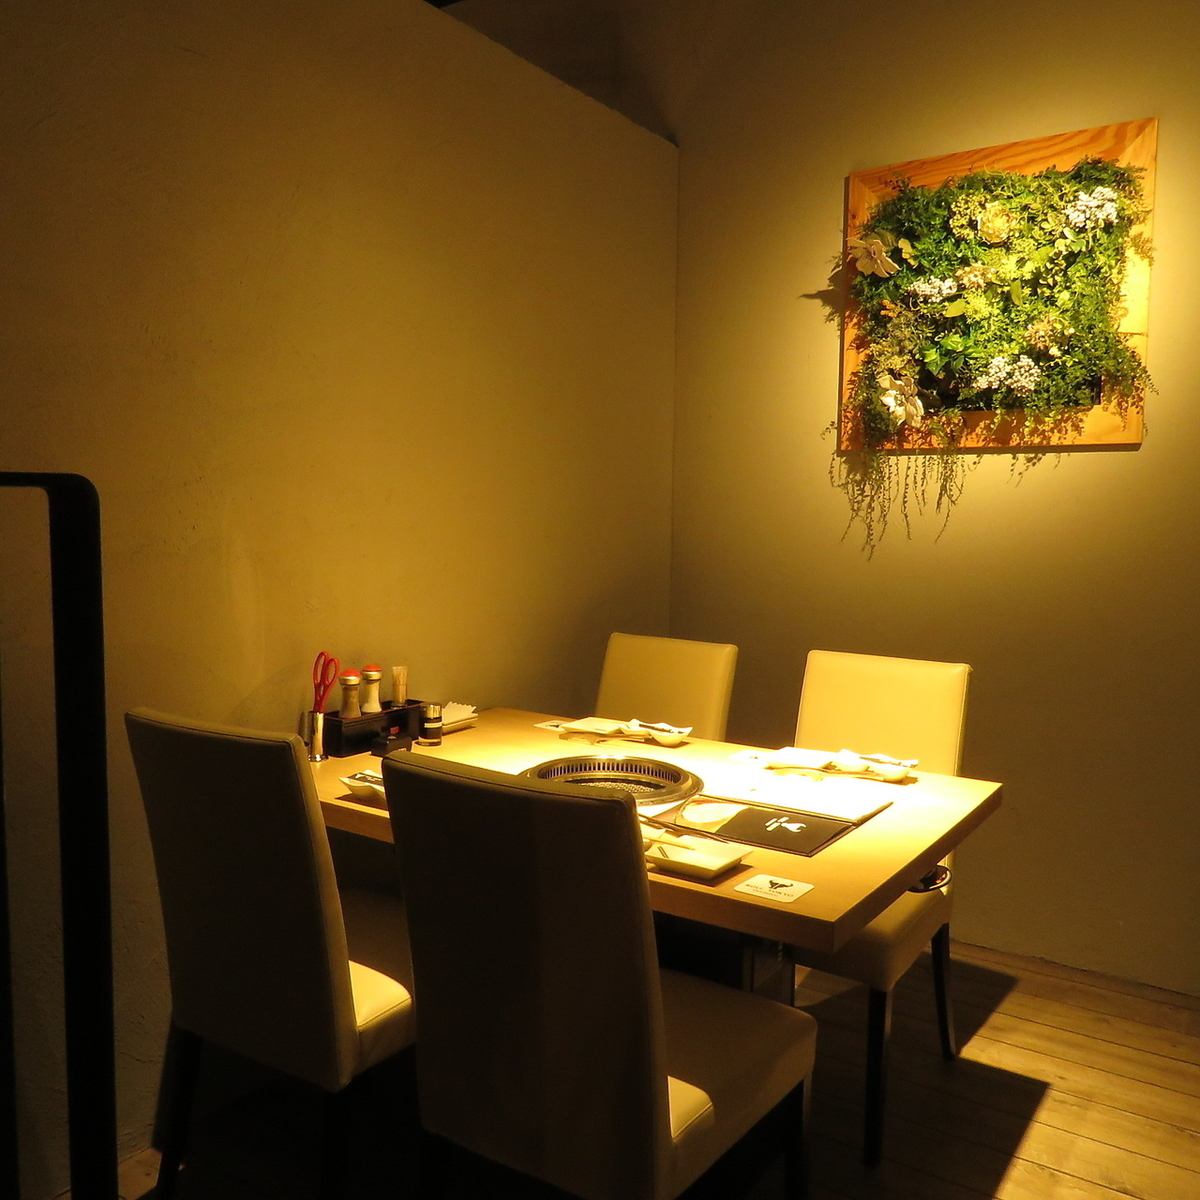 Fully equipped with private rooms for 4 to 8 people.For dates and entertaining ◎